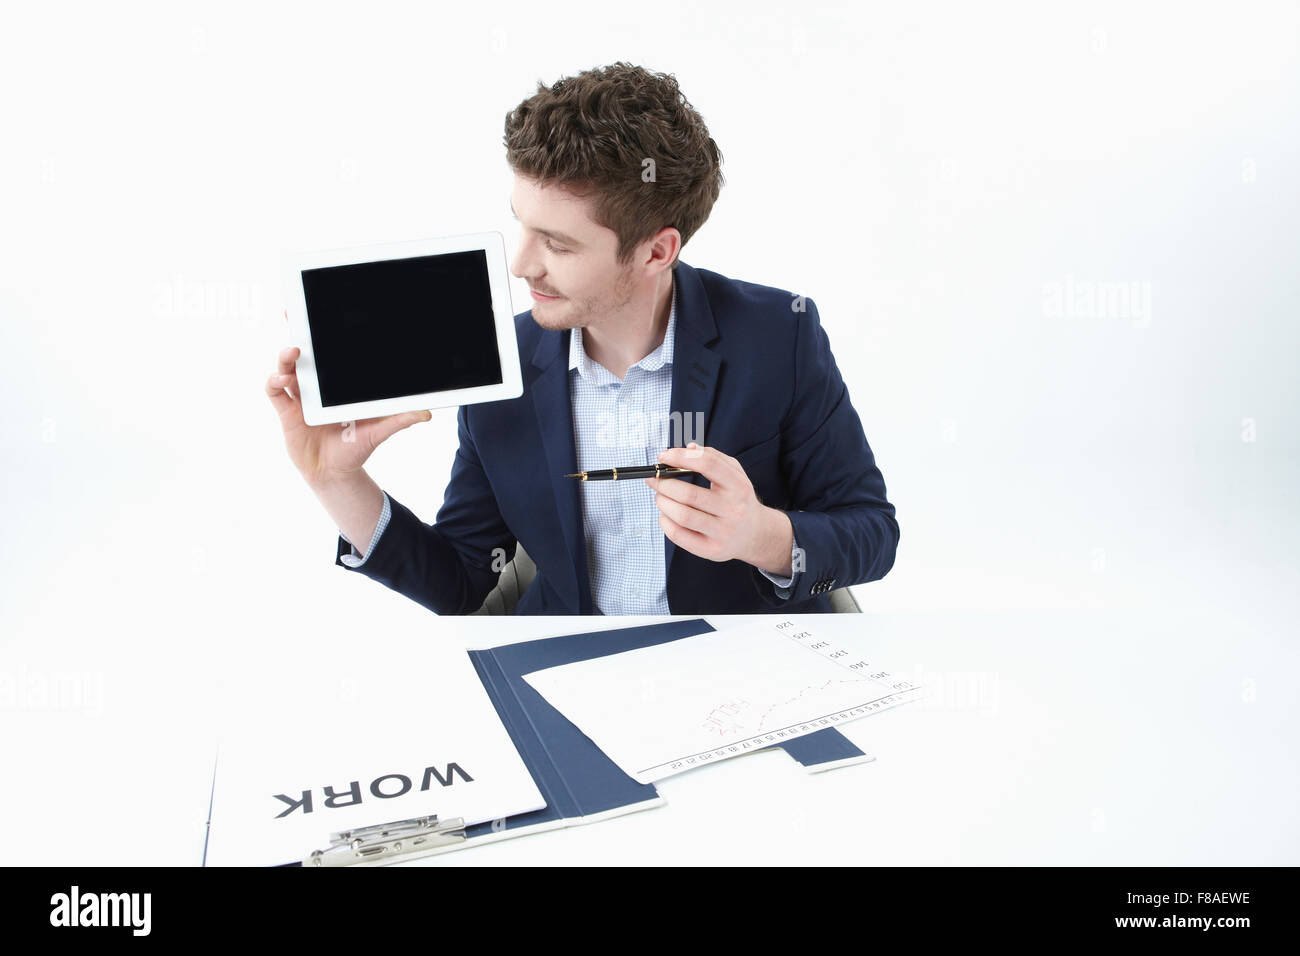 Man holding a tablet PC and looking at it Stock Photo